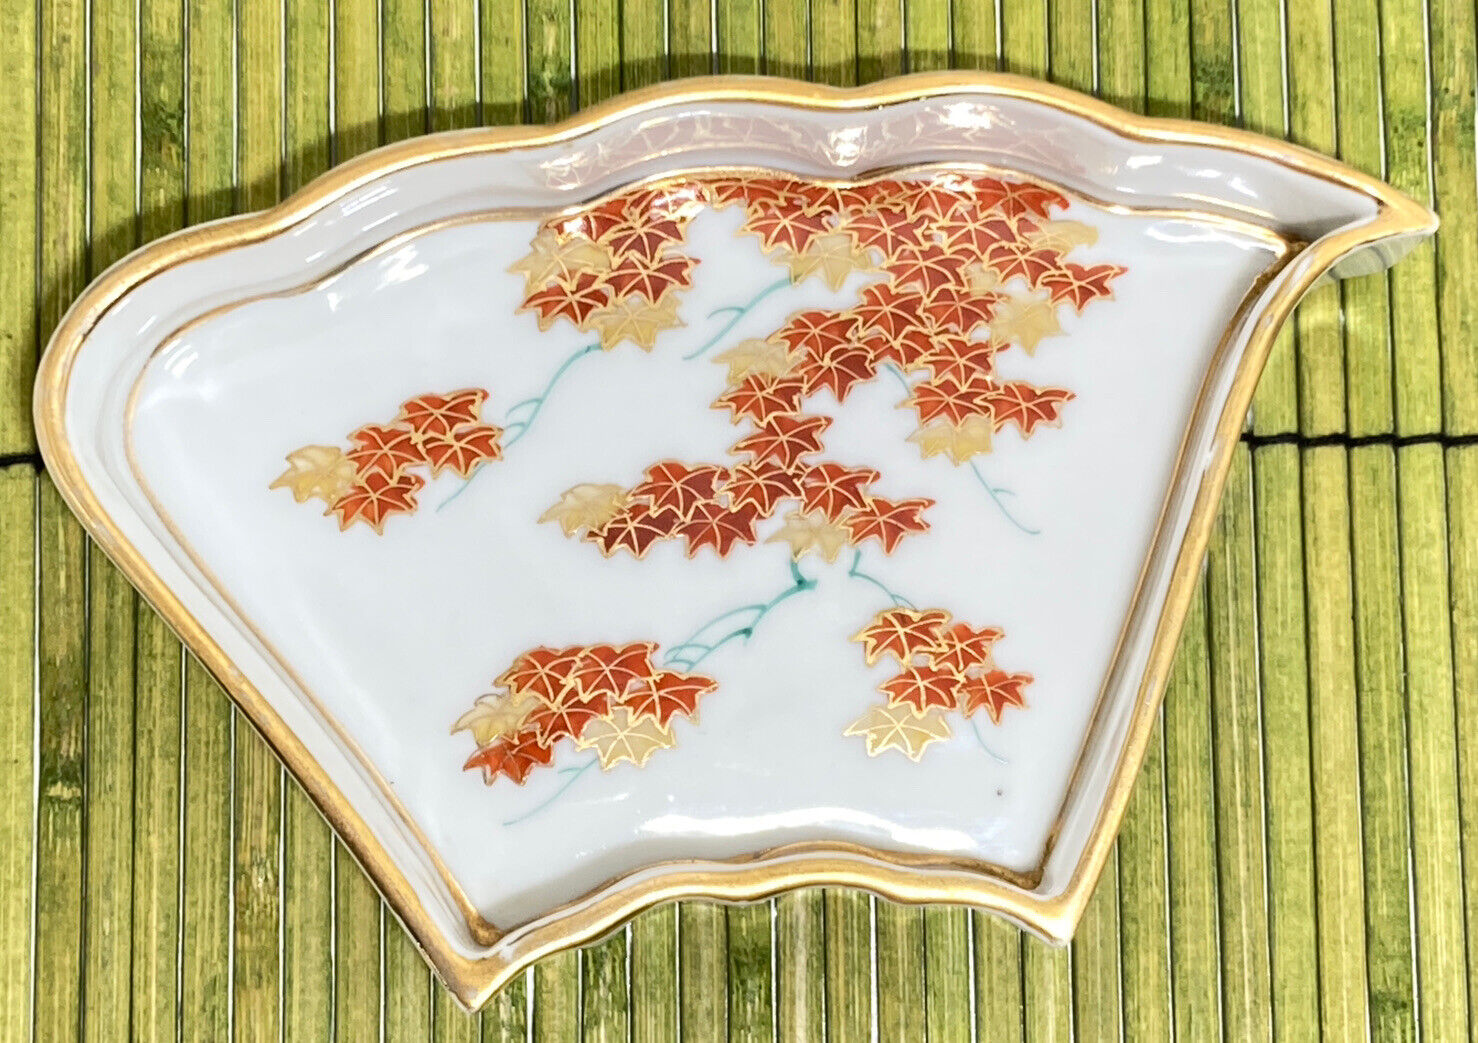 VTG Soko China Hand Painted Floral Maple Lazy Susan Serving Dish Replacement